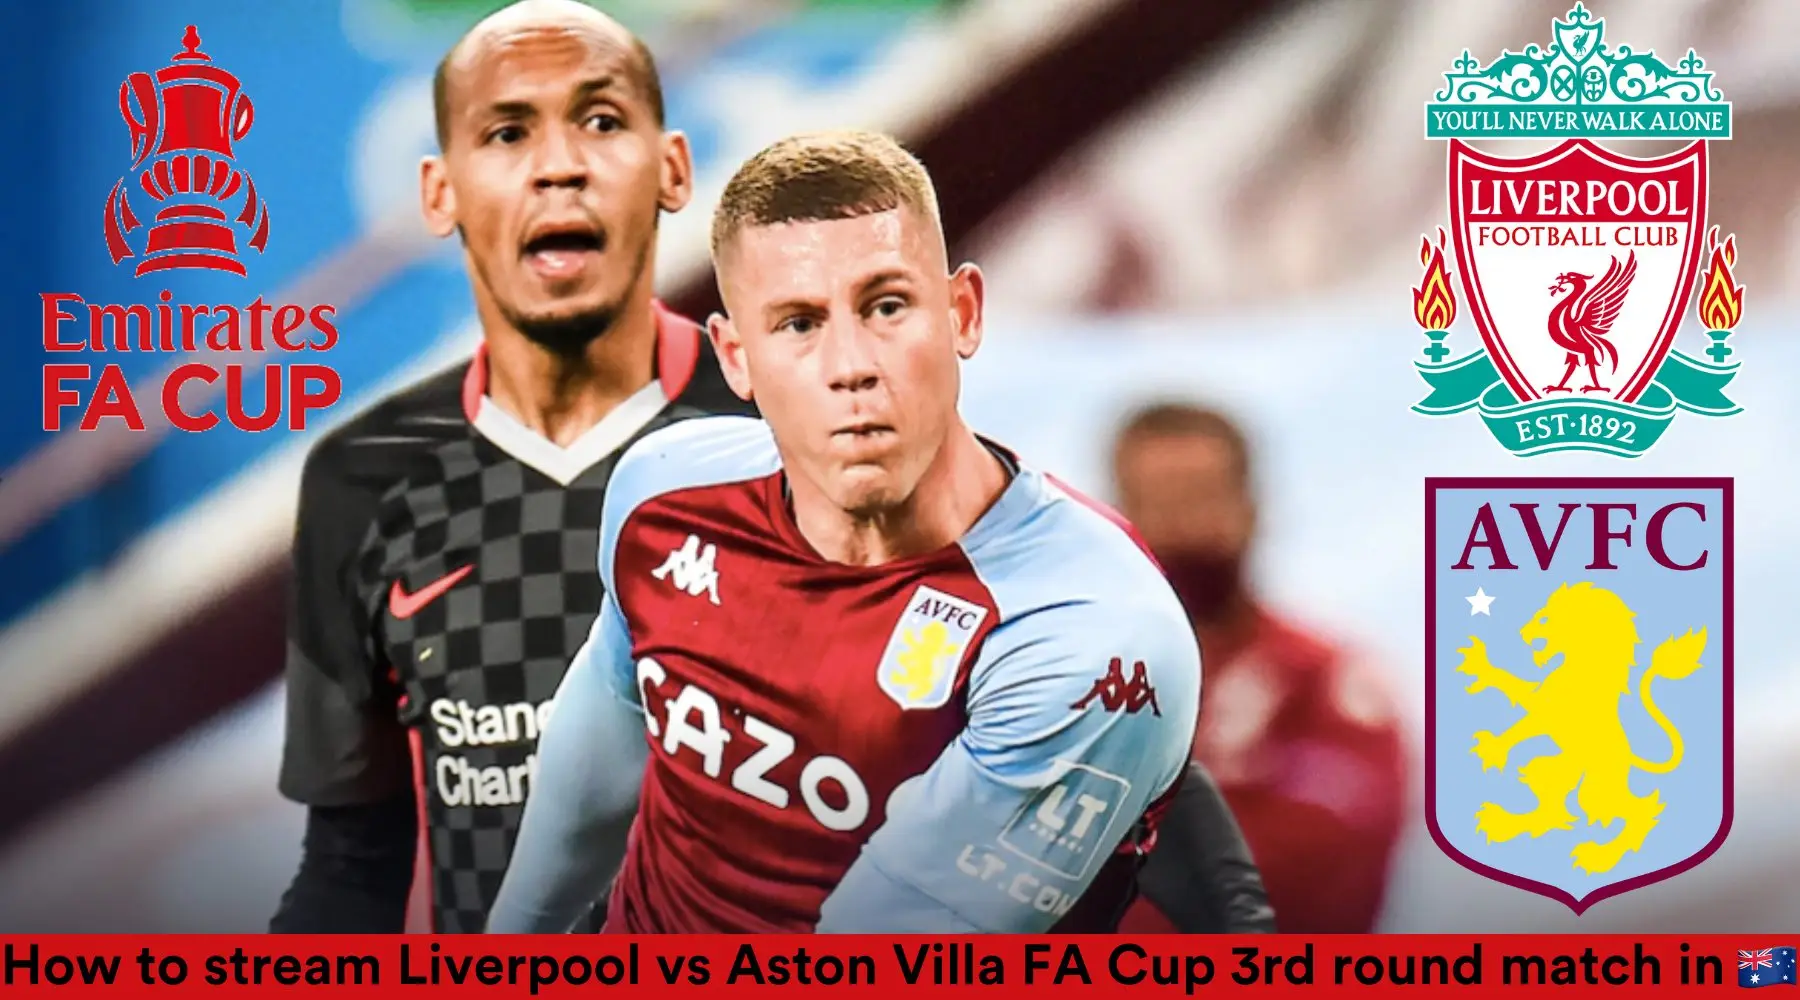 Aston Villa vs Liverpool FA Cup: How to watch, kick-off time